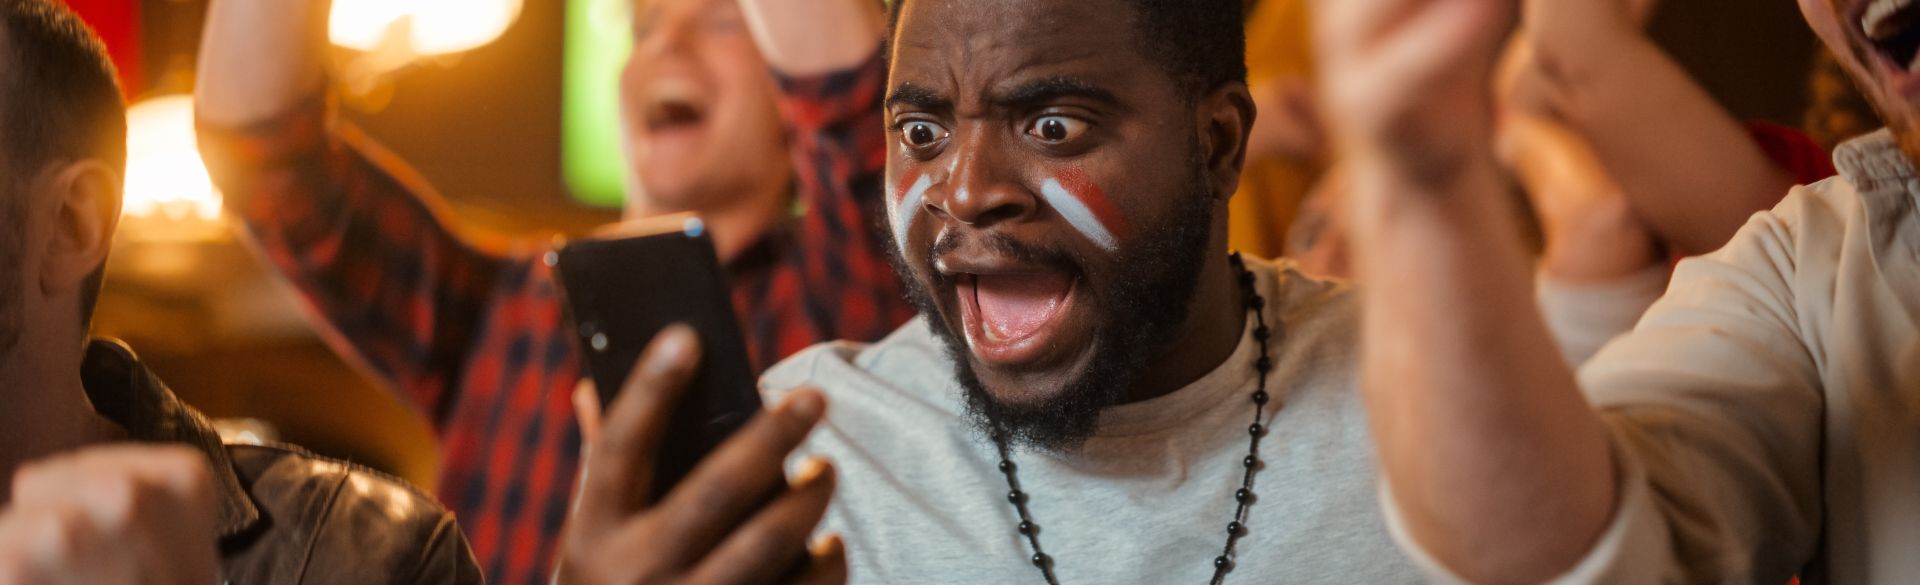 A fan sporting paint on his face expresses wide-eyed disbelief at what he sees on his phone